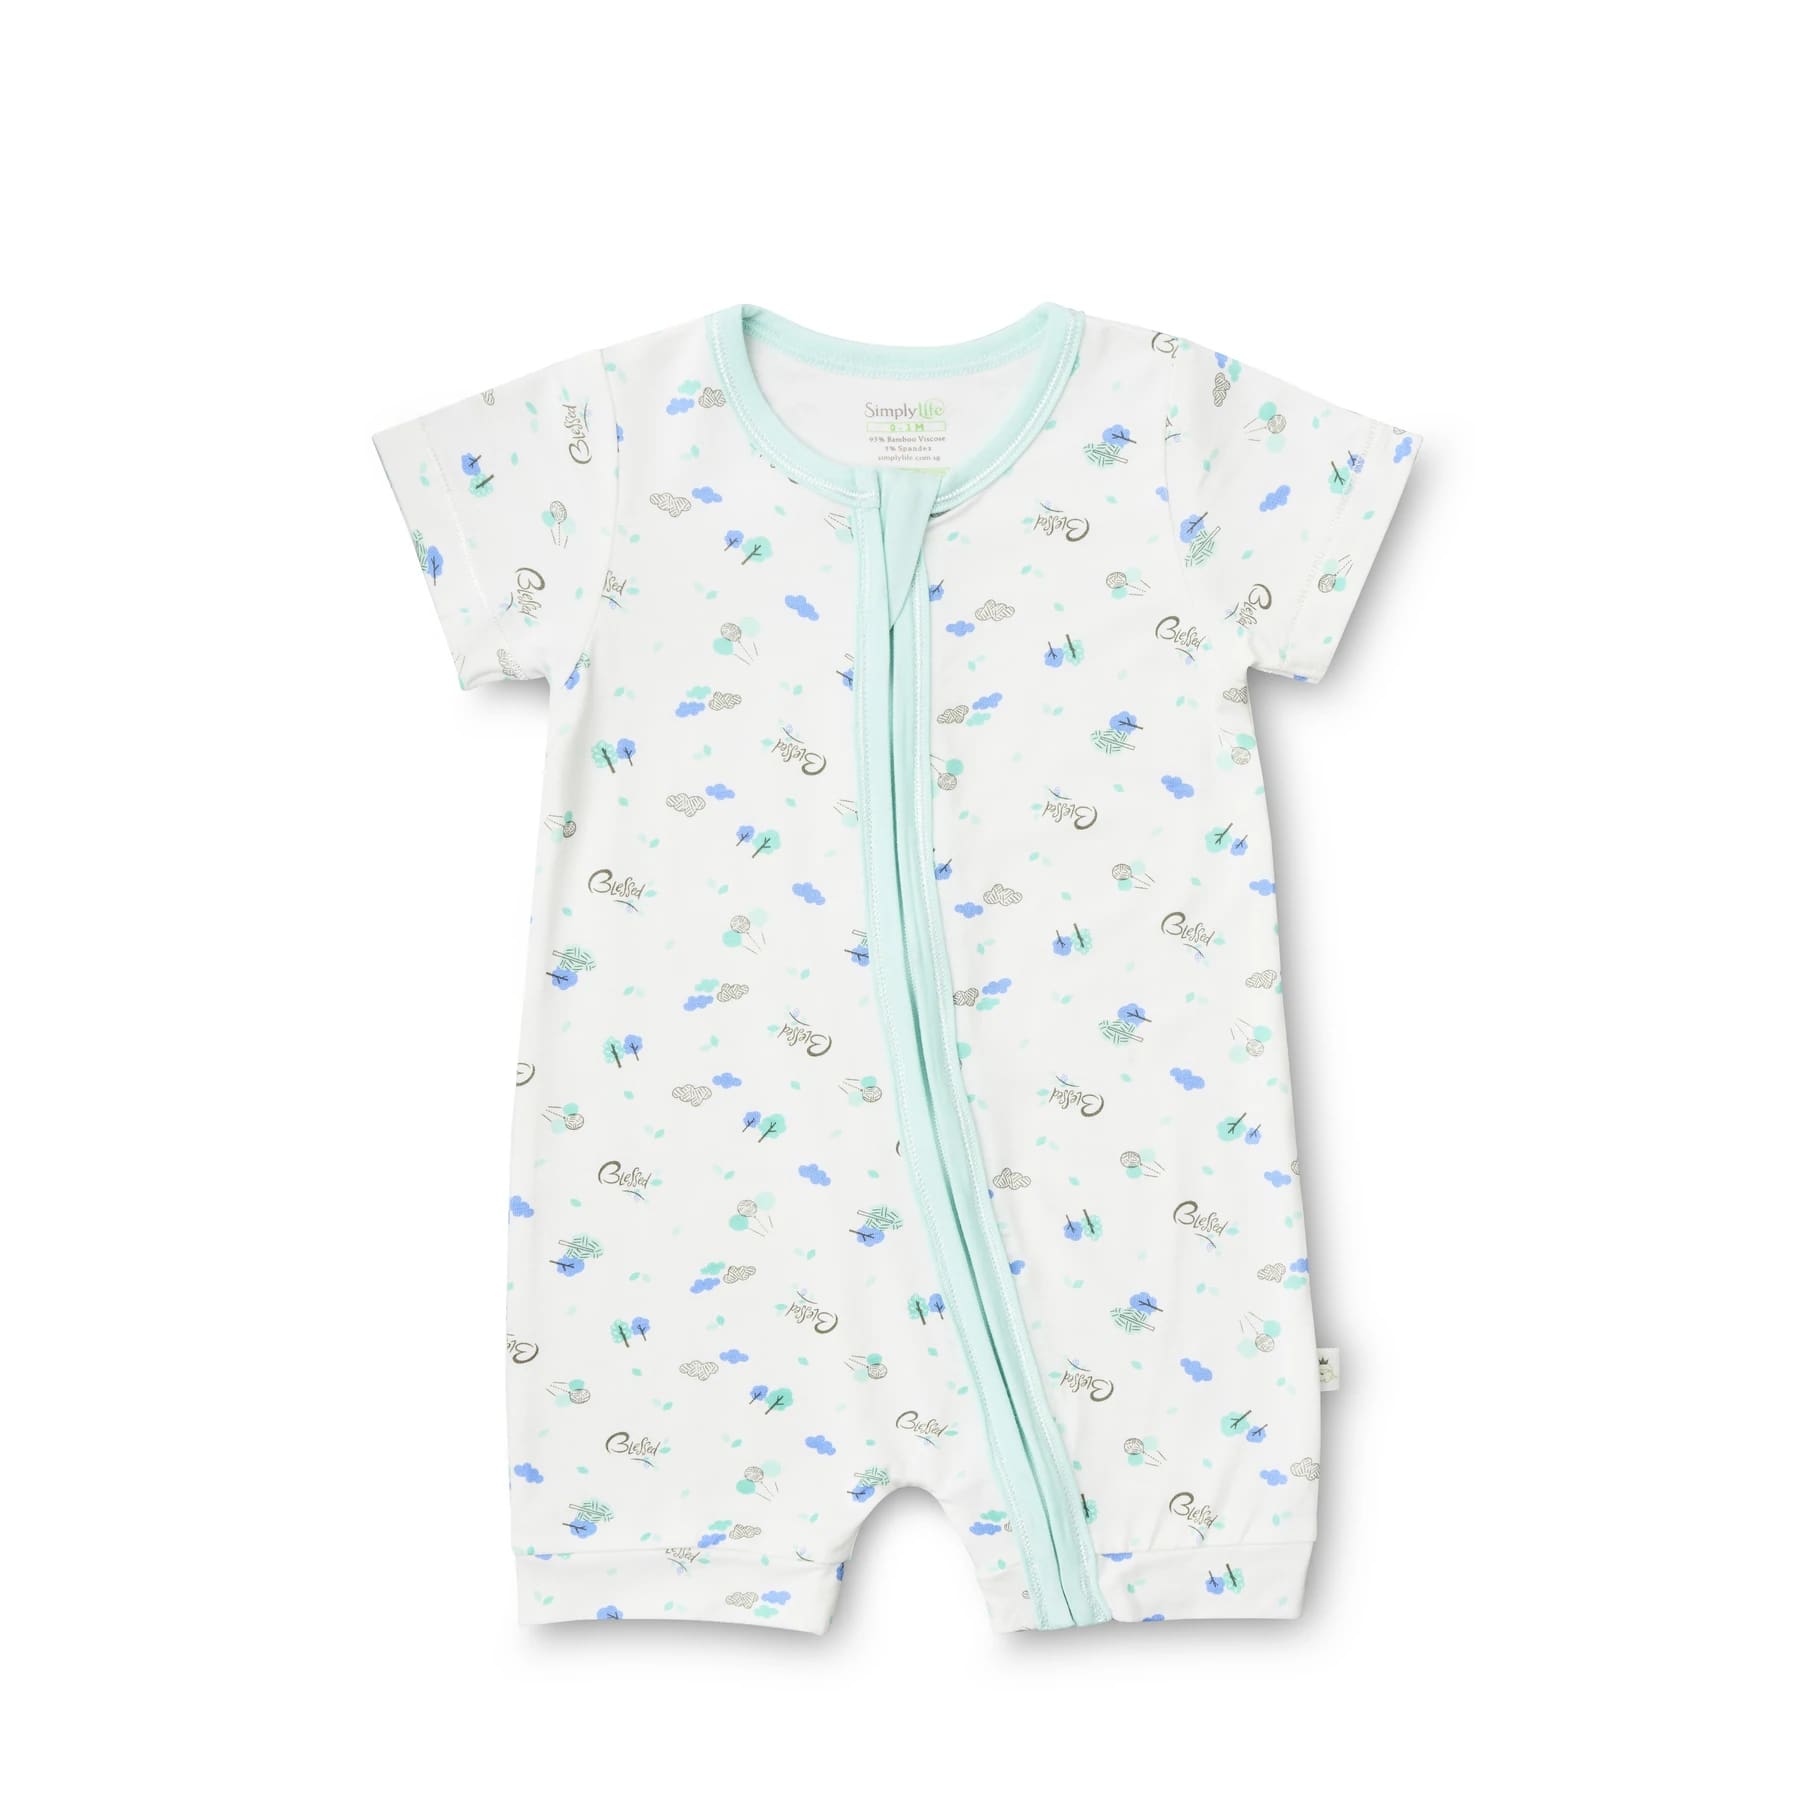 Simply Life Bamboo Short Sleeved Zipper Shortall - Blessed (SLWR-36BD)